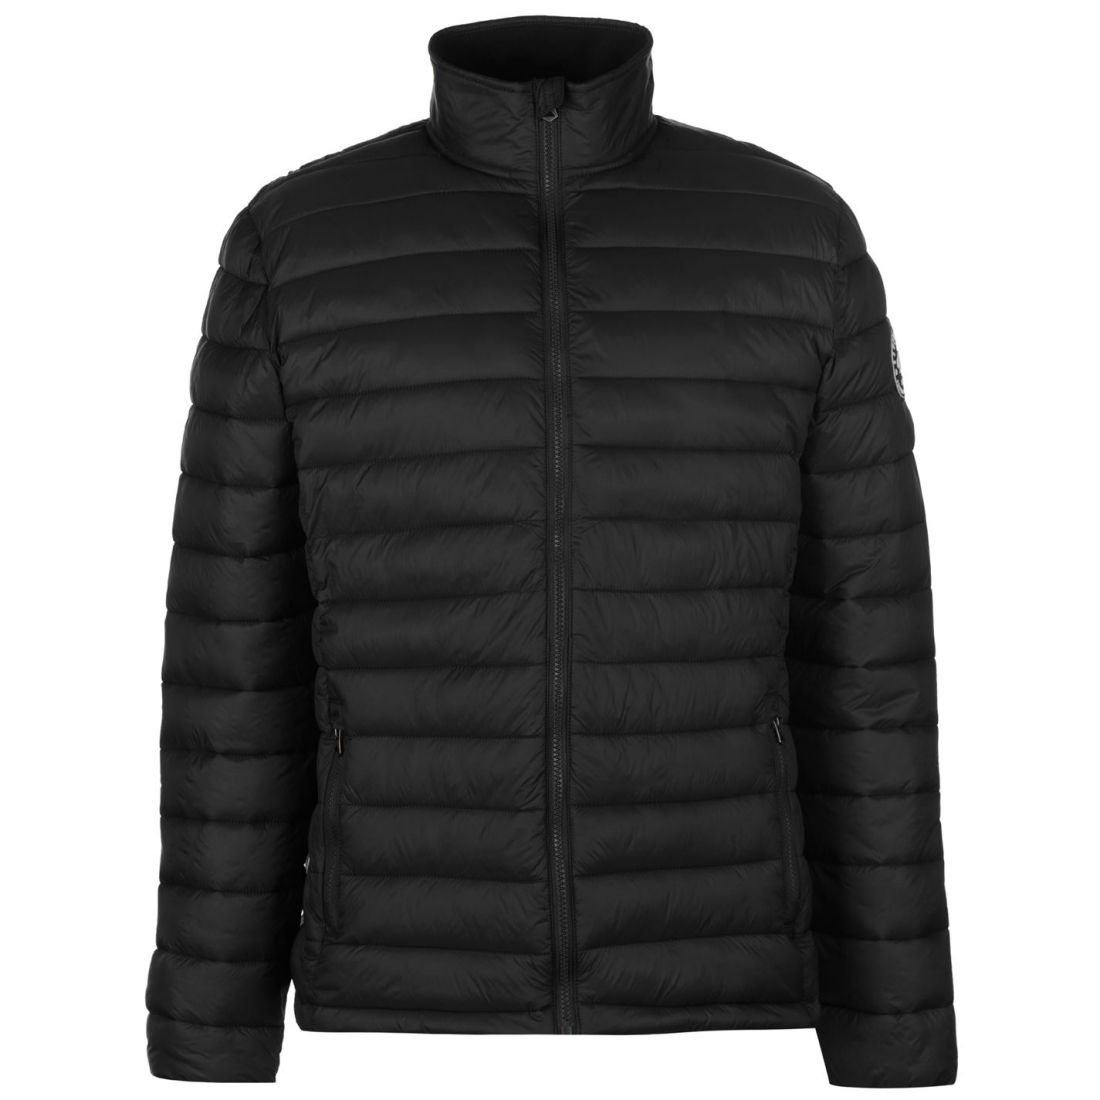 SoulCal Micro Bubble Jacket Mens Gents Padded Coat Top Full Length ...